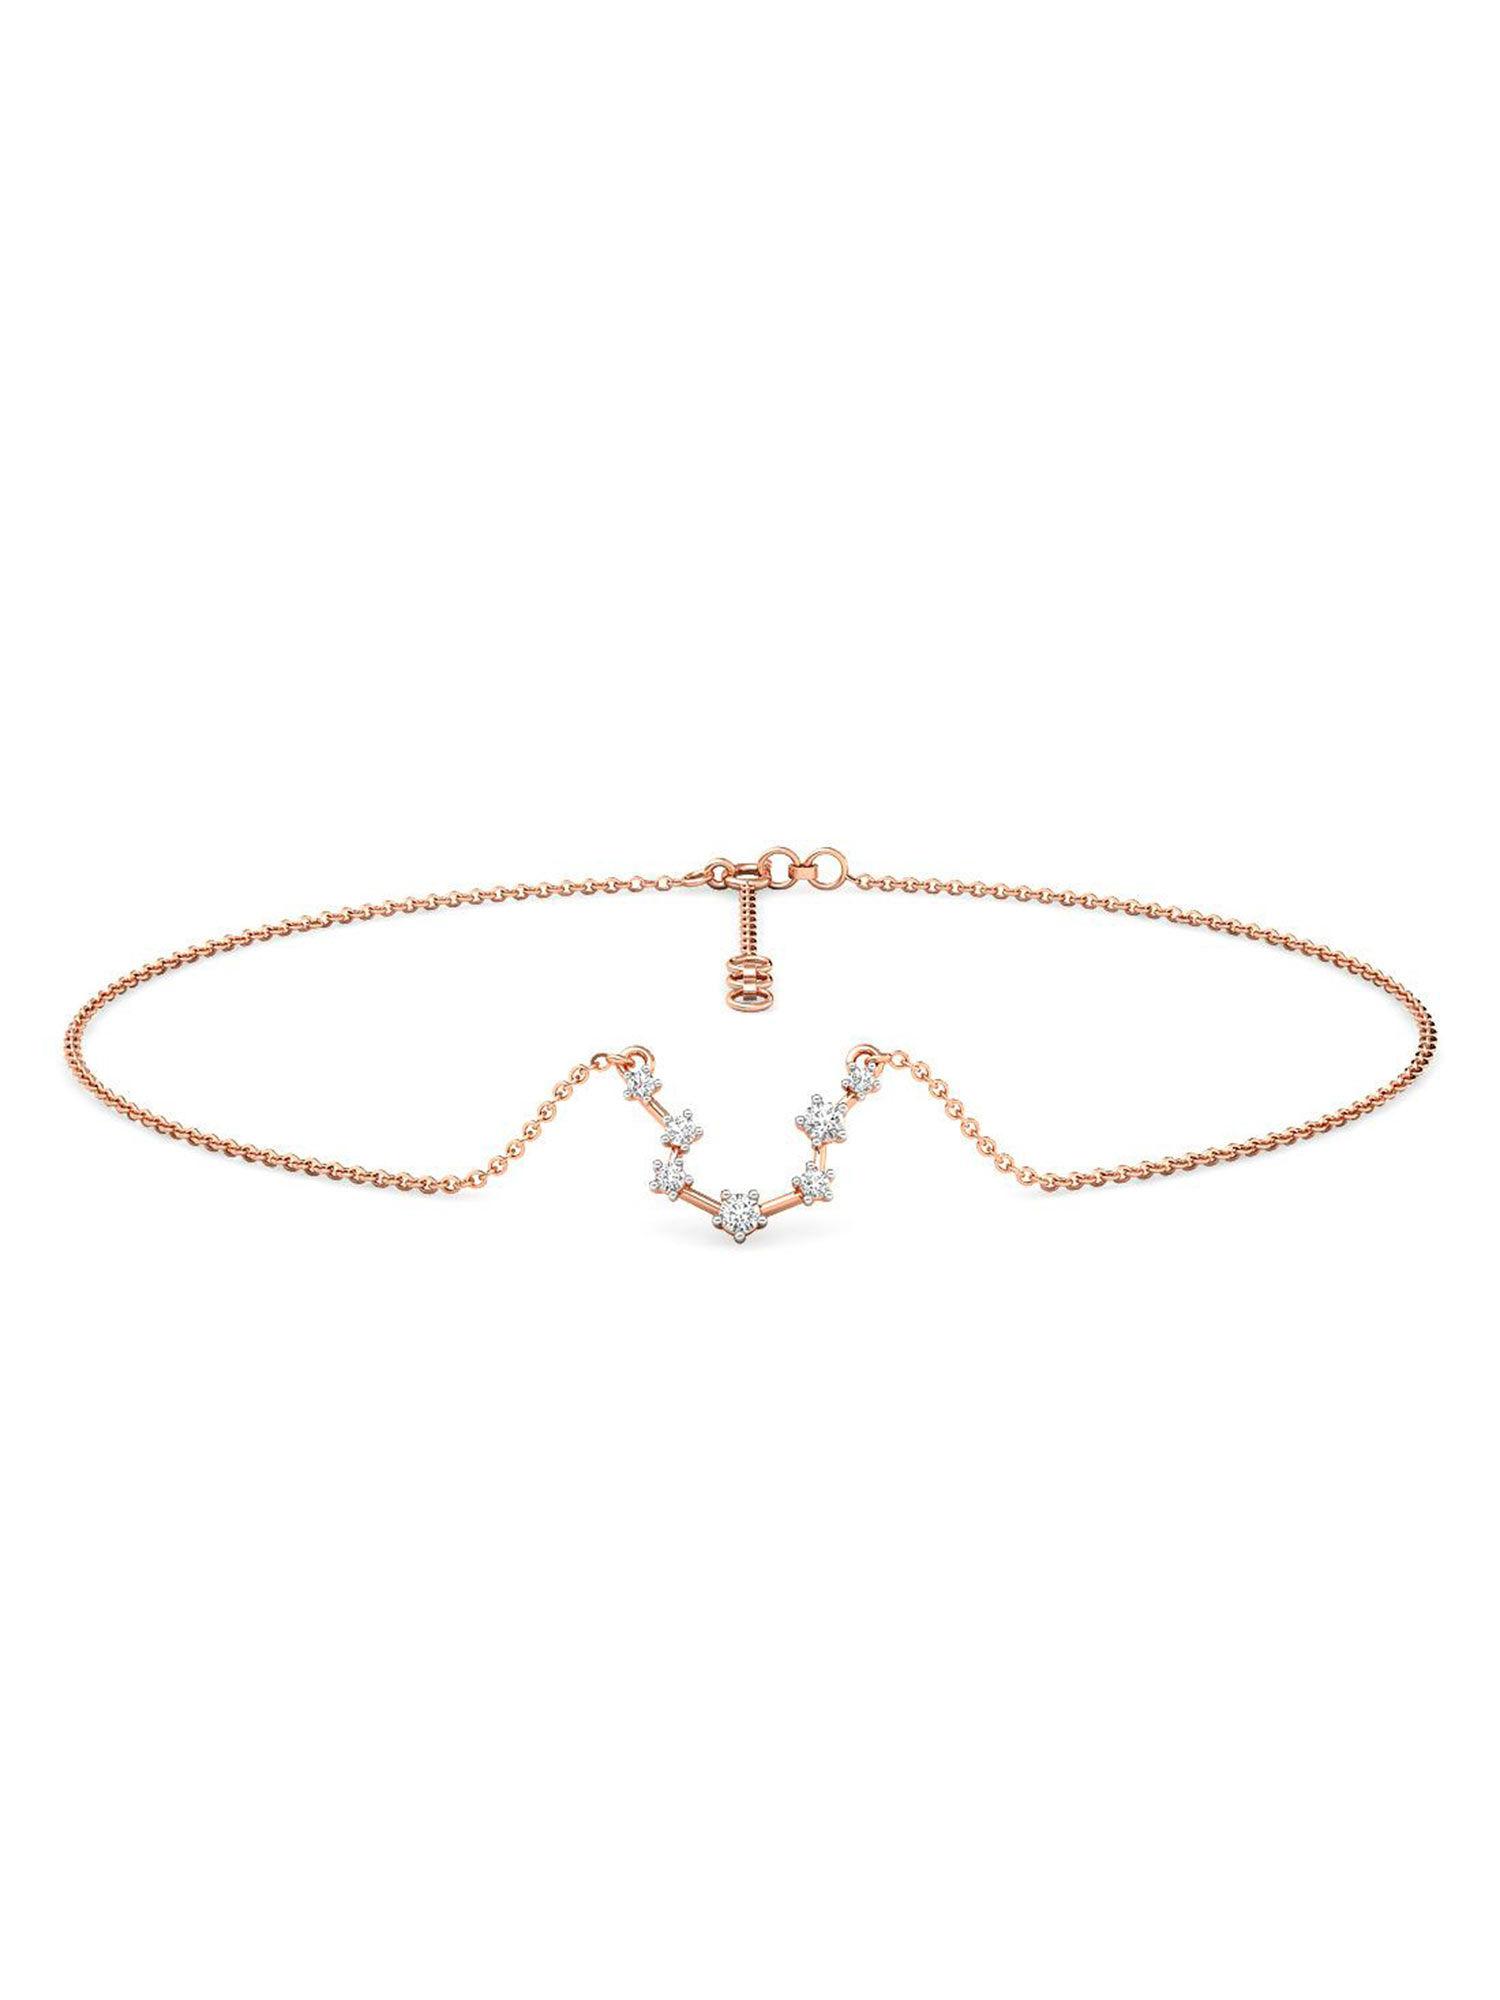 aquarius 14k rose gold and diamond anklet for women